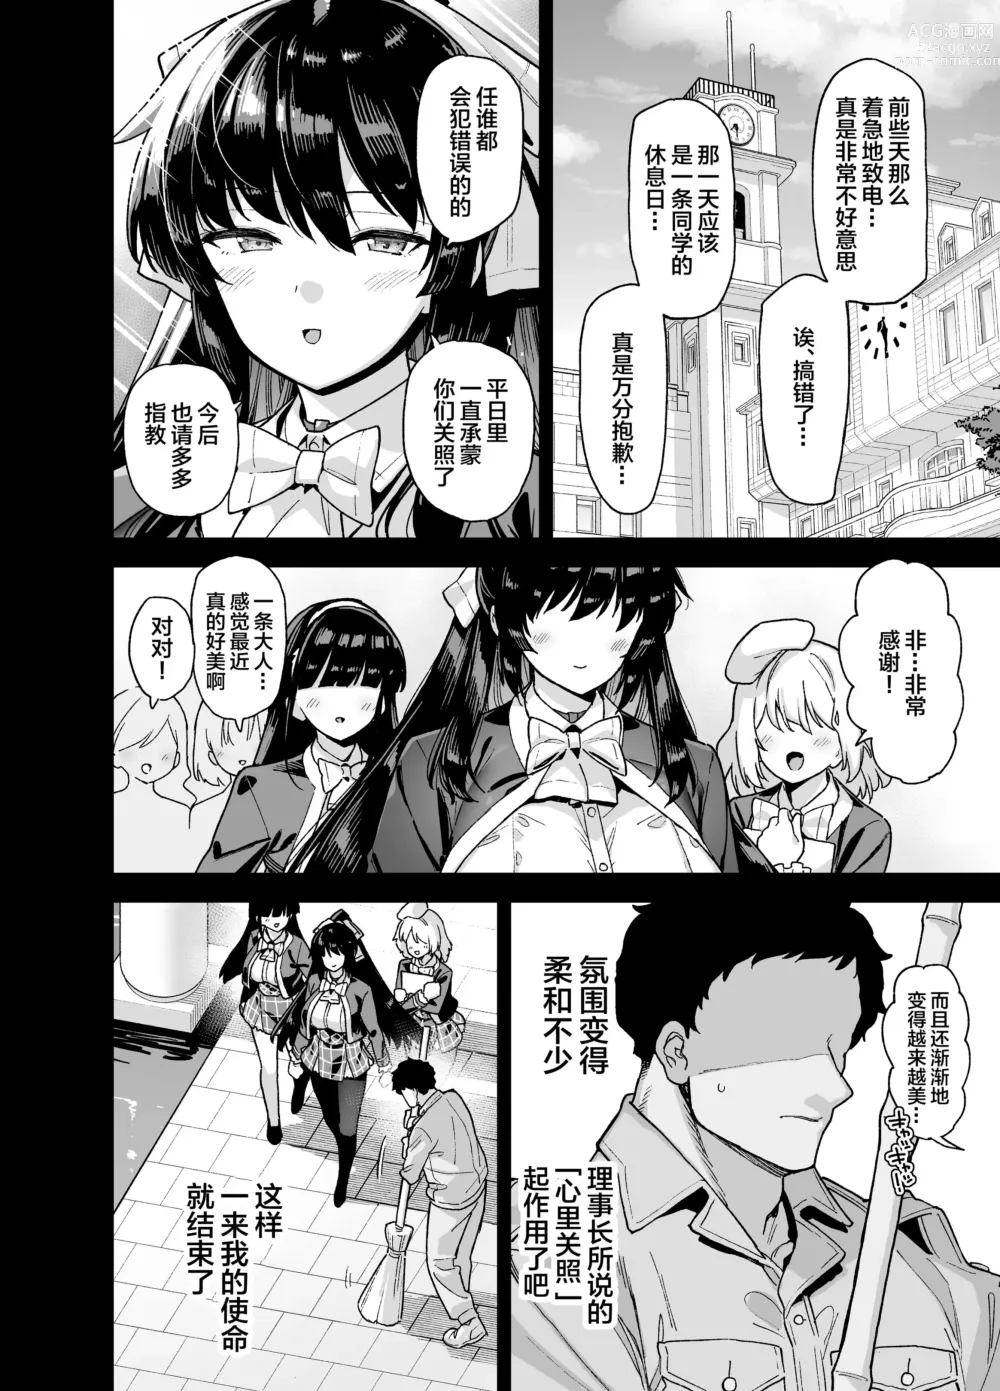 Page 51 of doujinshi 桜春女学院の男優